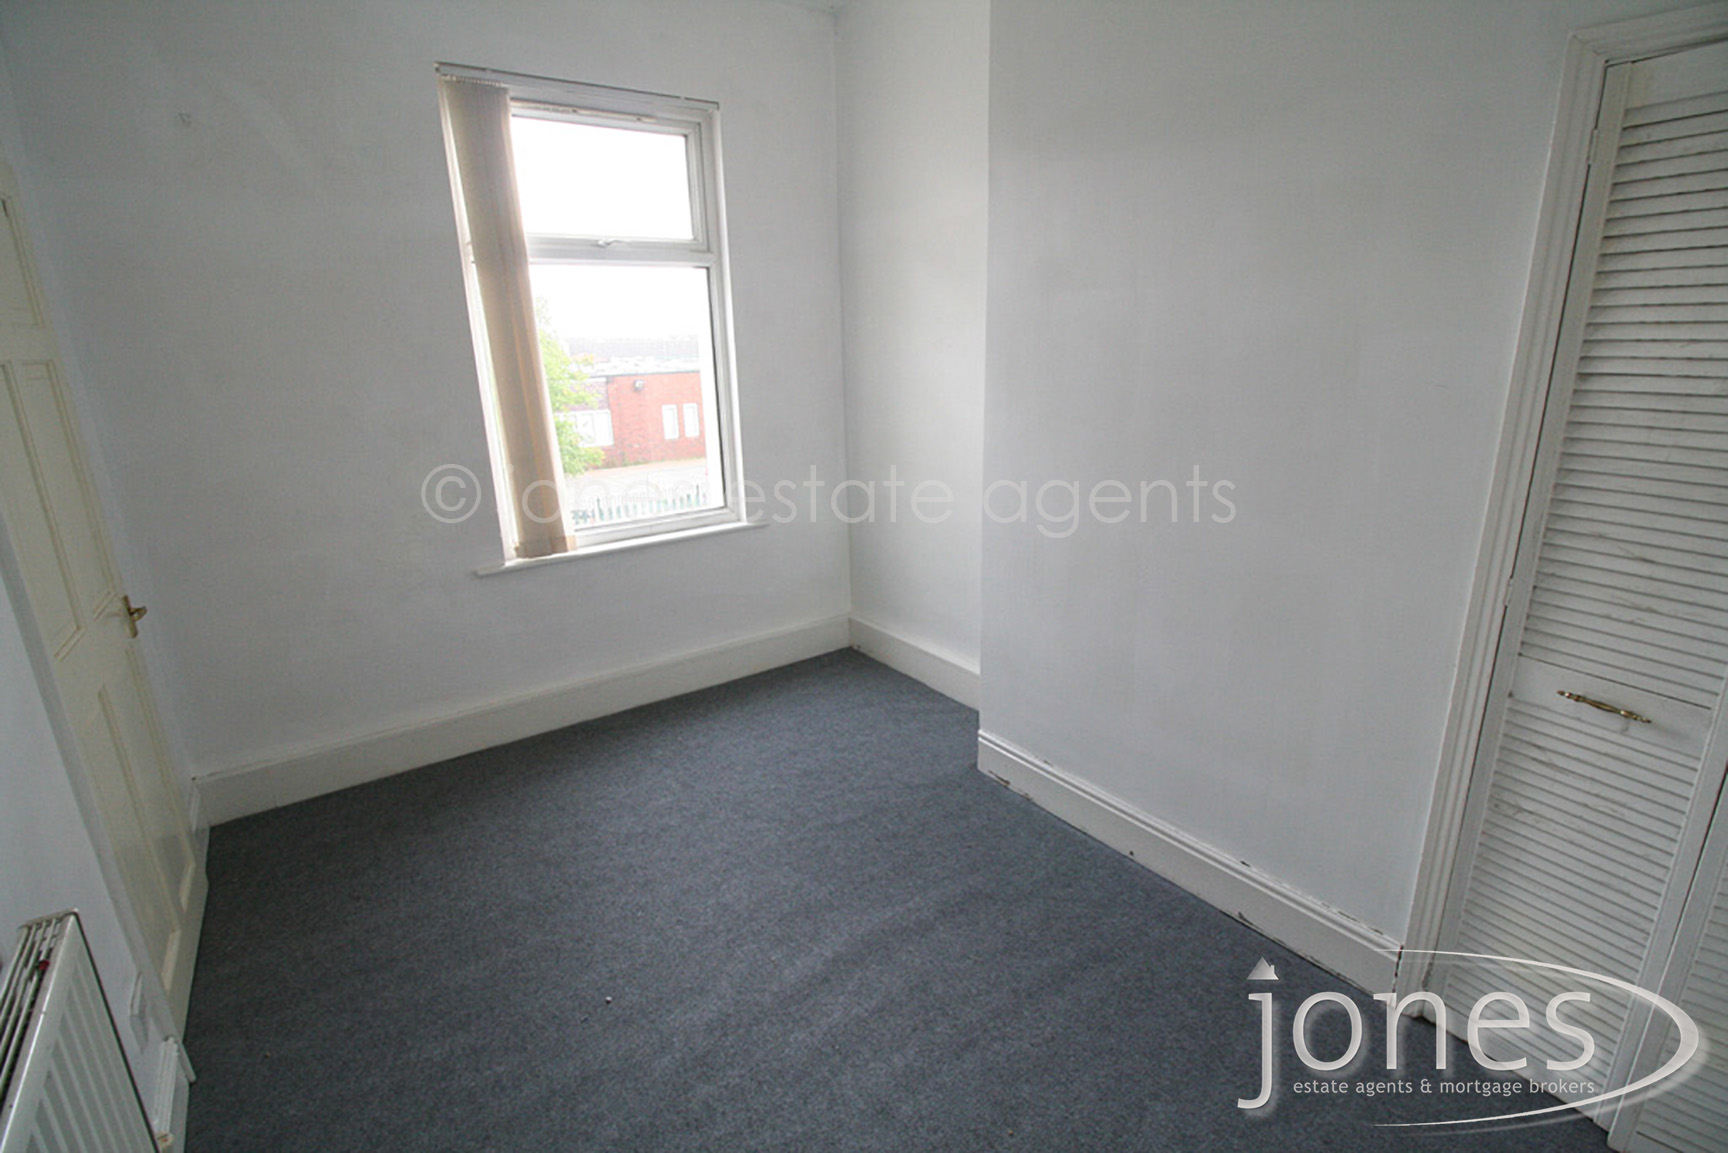 Home for Sale Let - Photo 06 St Cuthberts Road, Stockton on tees, TS18 3JW